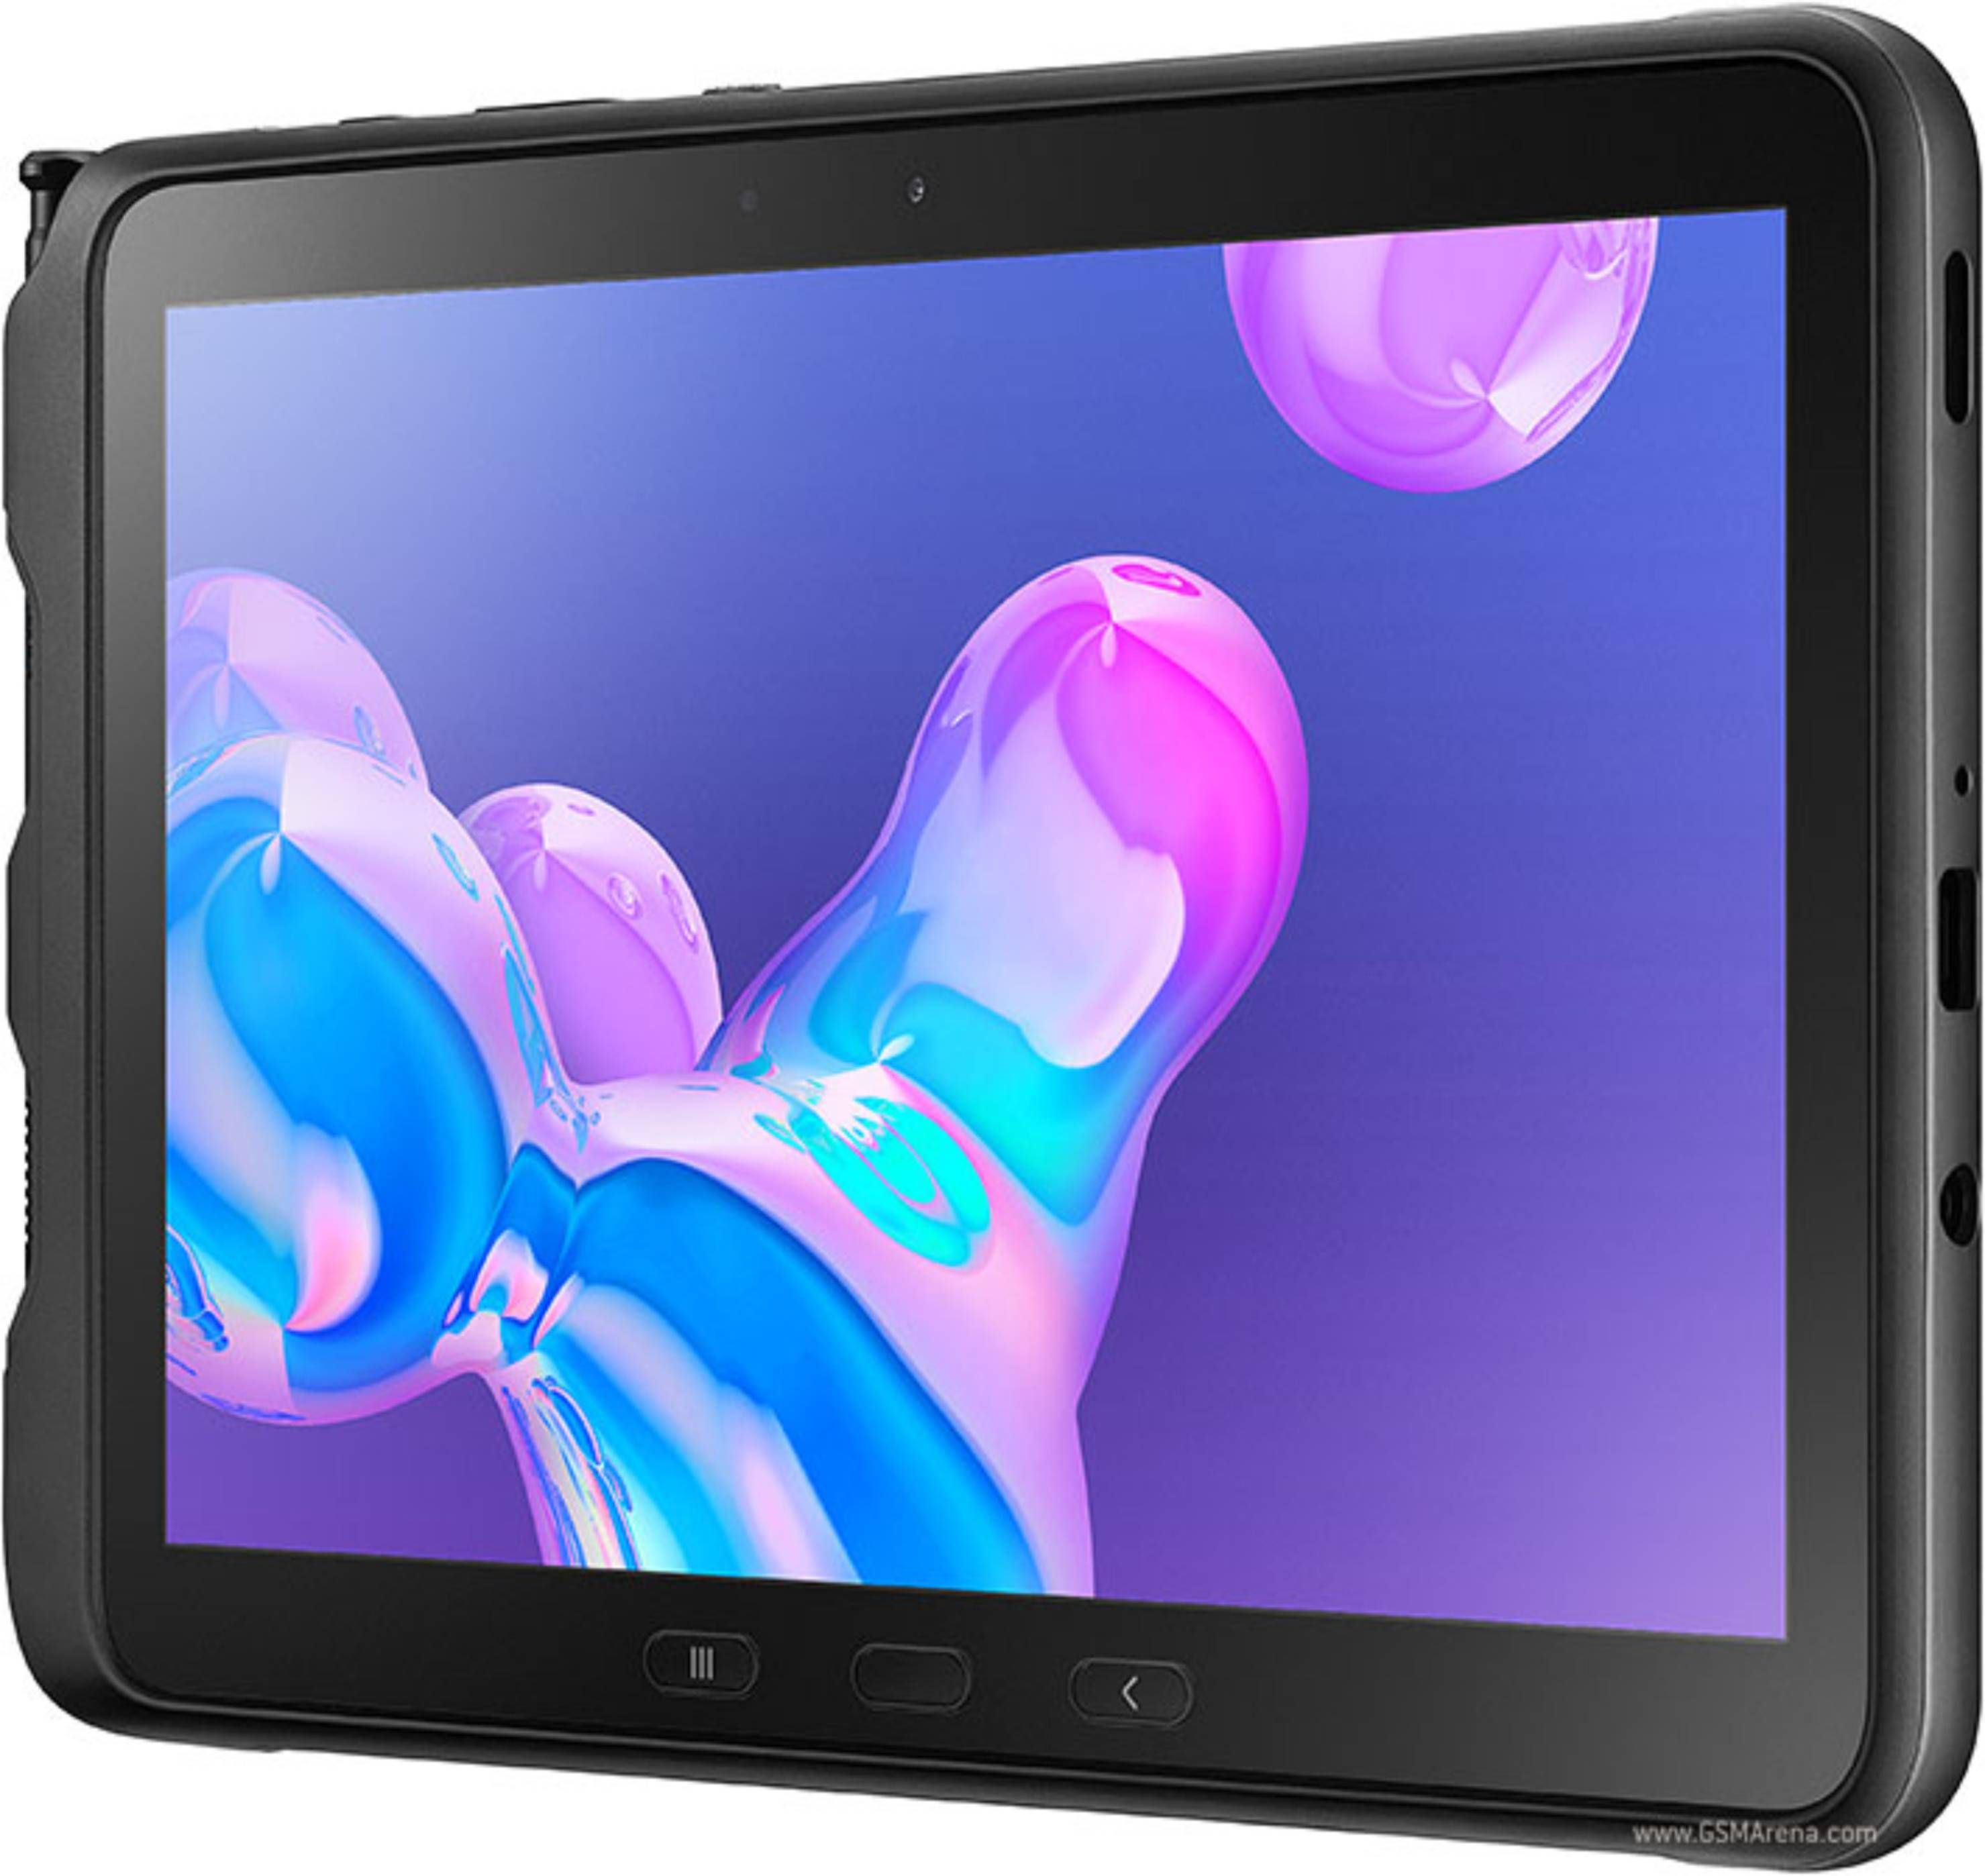 Samsung Galaxy Tab Active Pro Specifications and Price in Kenya